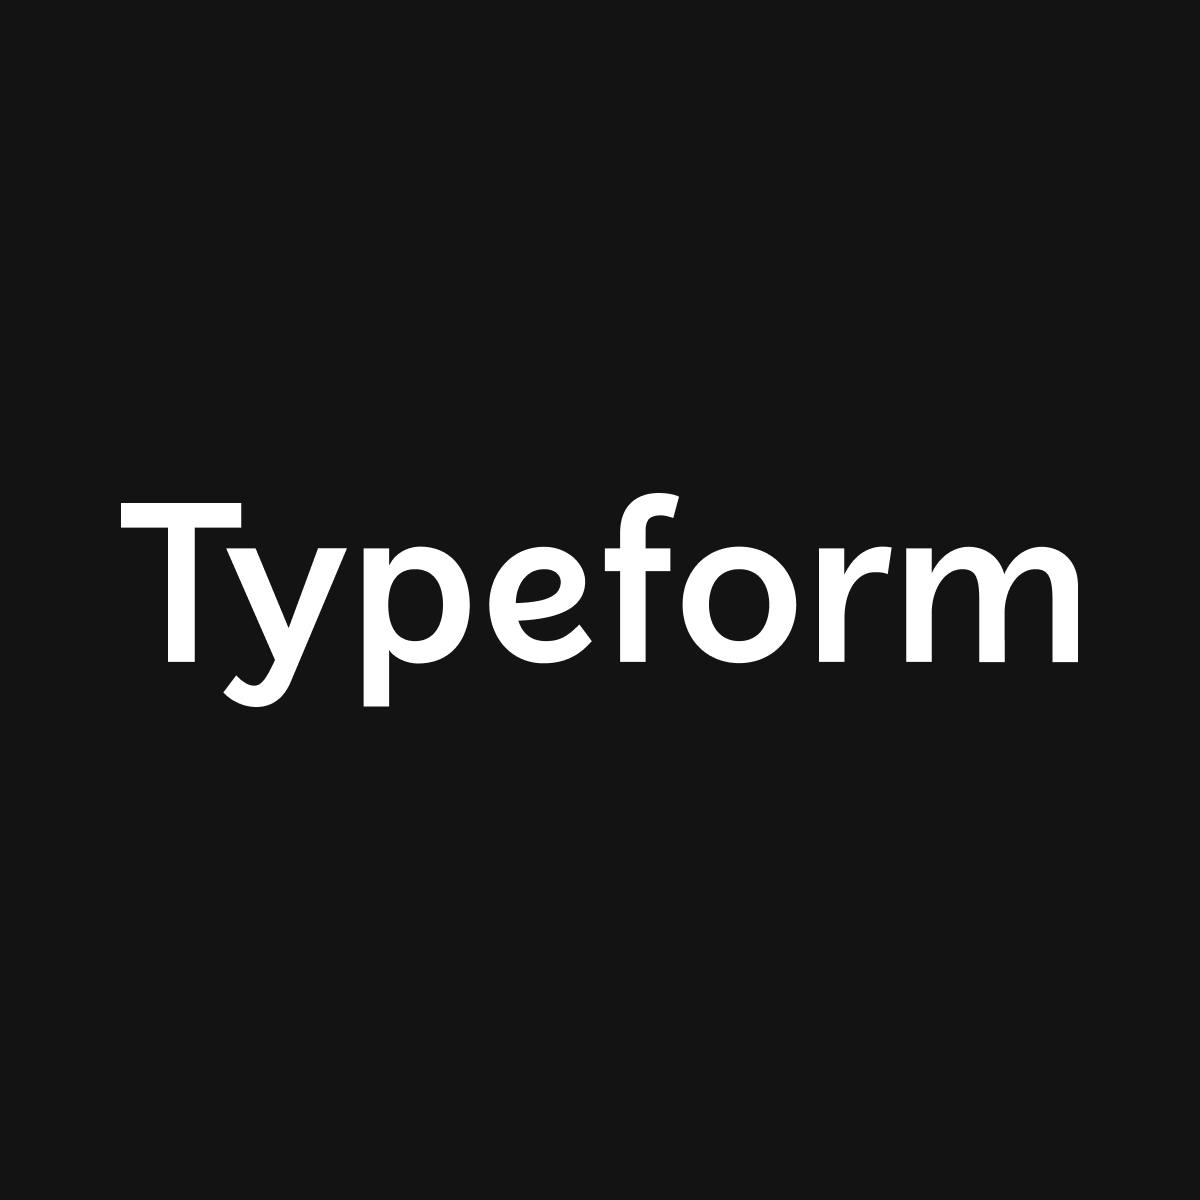 Typeform 101: All About Typeform's Forms by Formester!